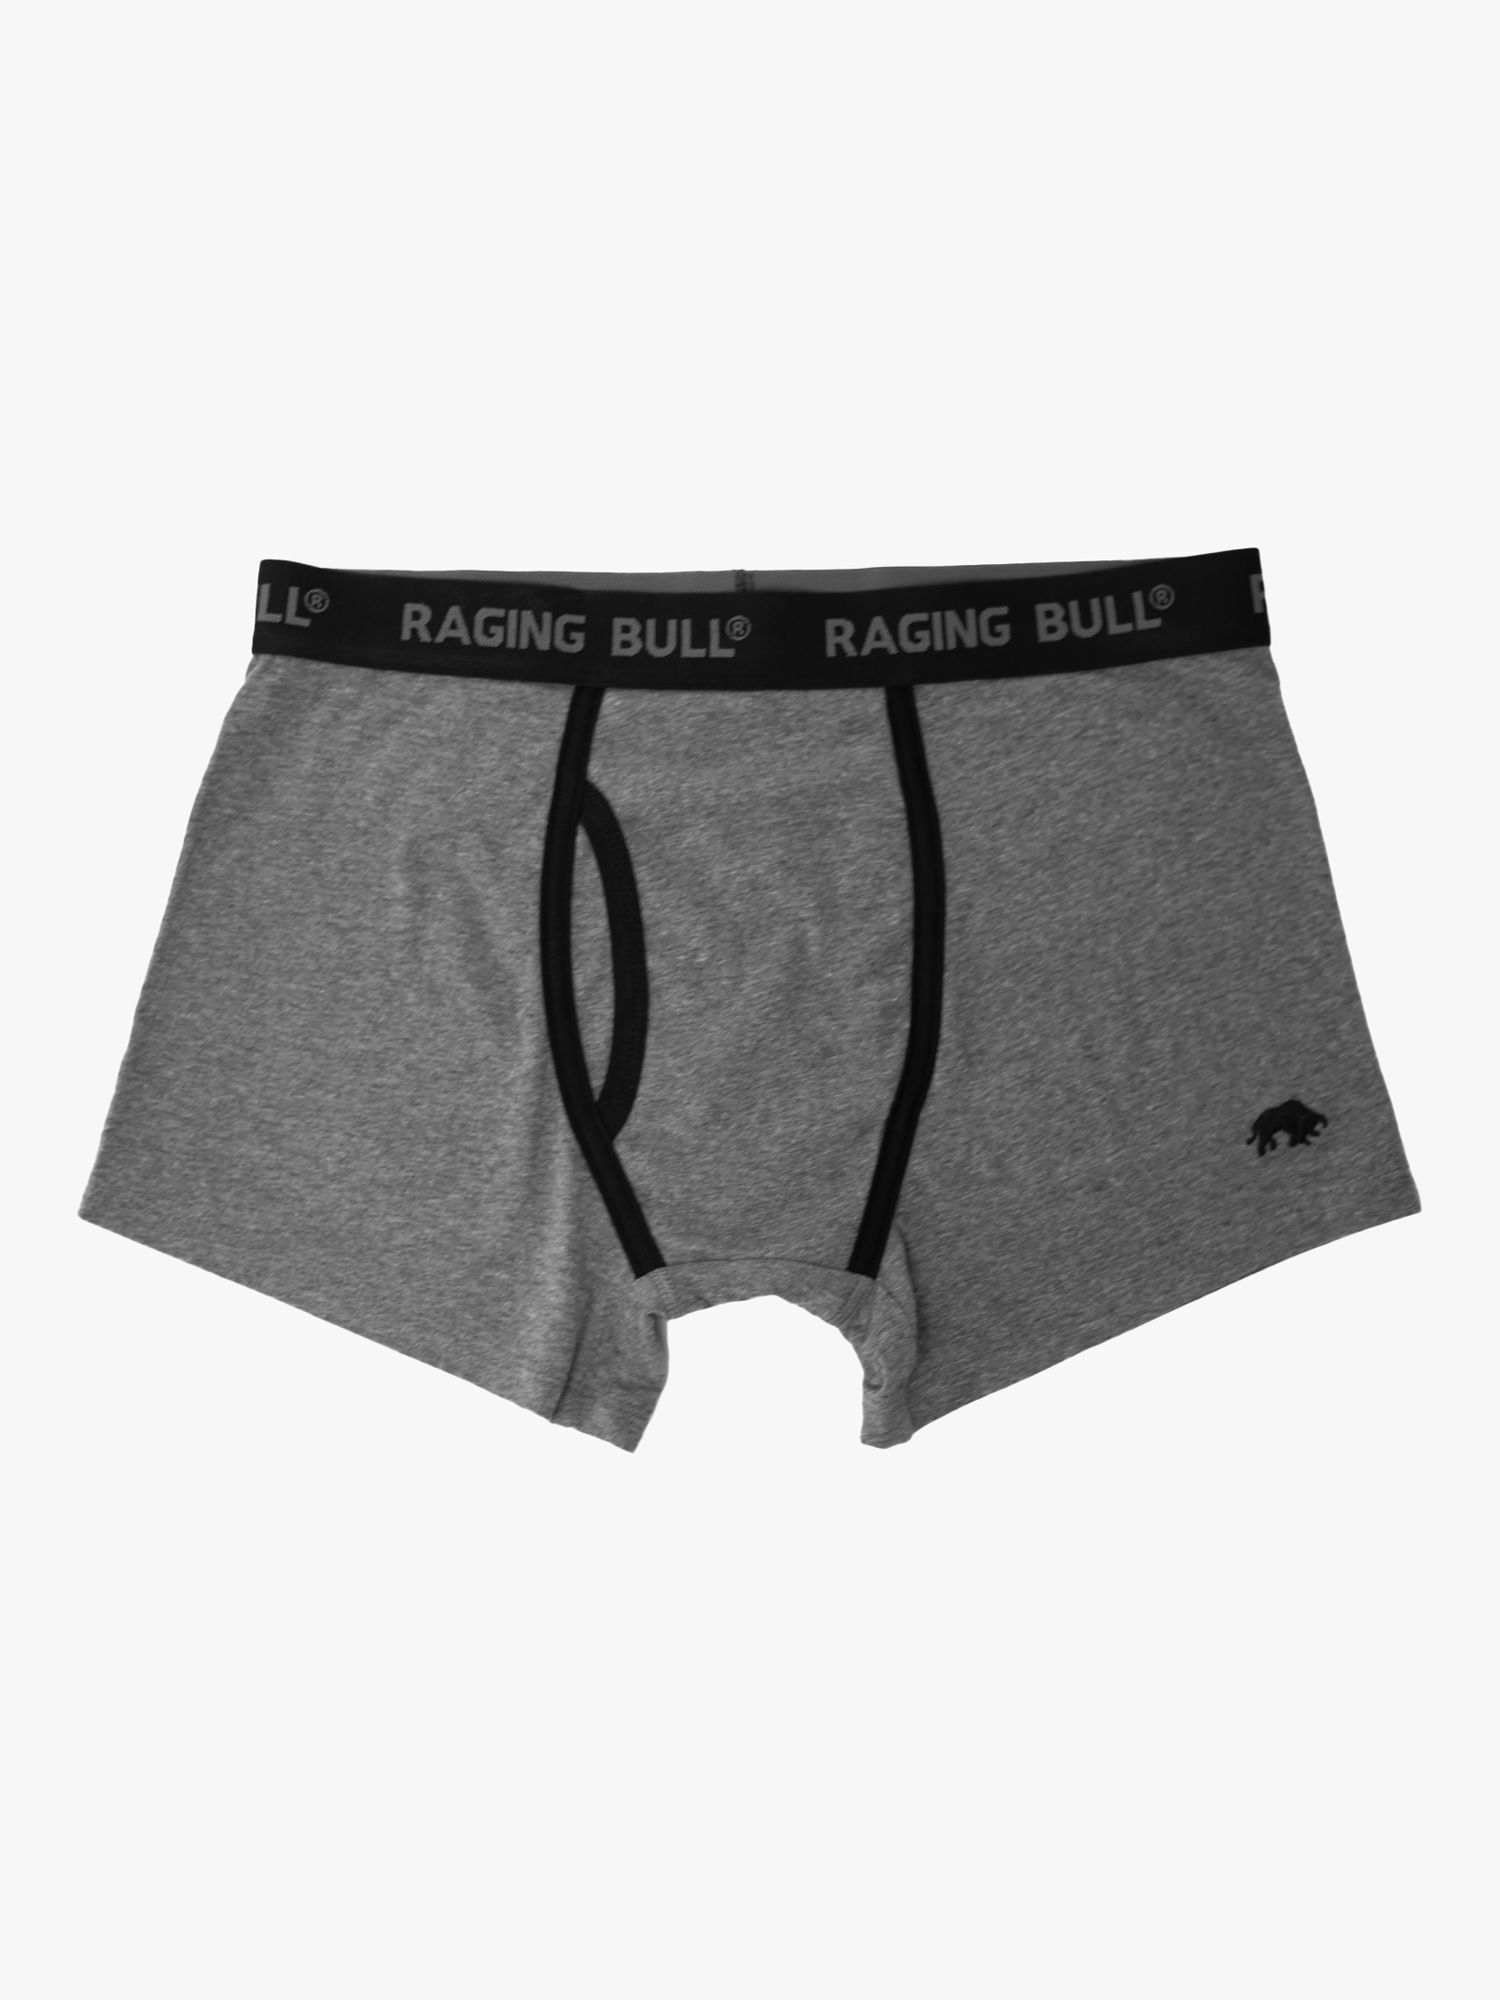 Raging Bull Cotton Stretch Boxers, Pack of 3, Black at John Lewis ...